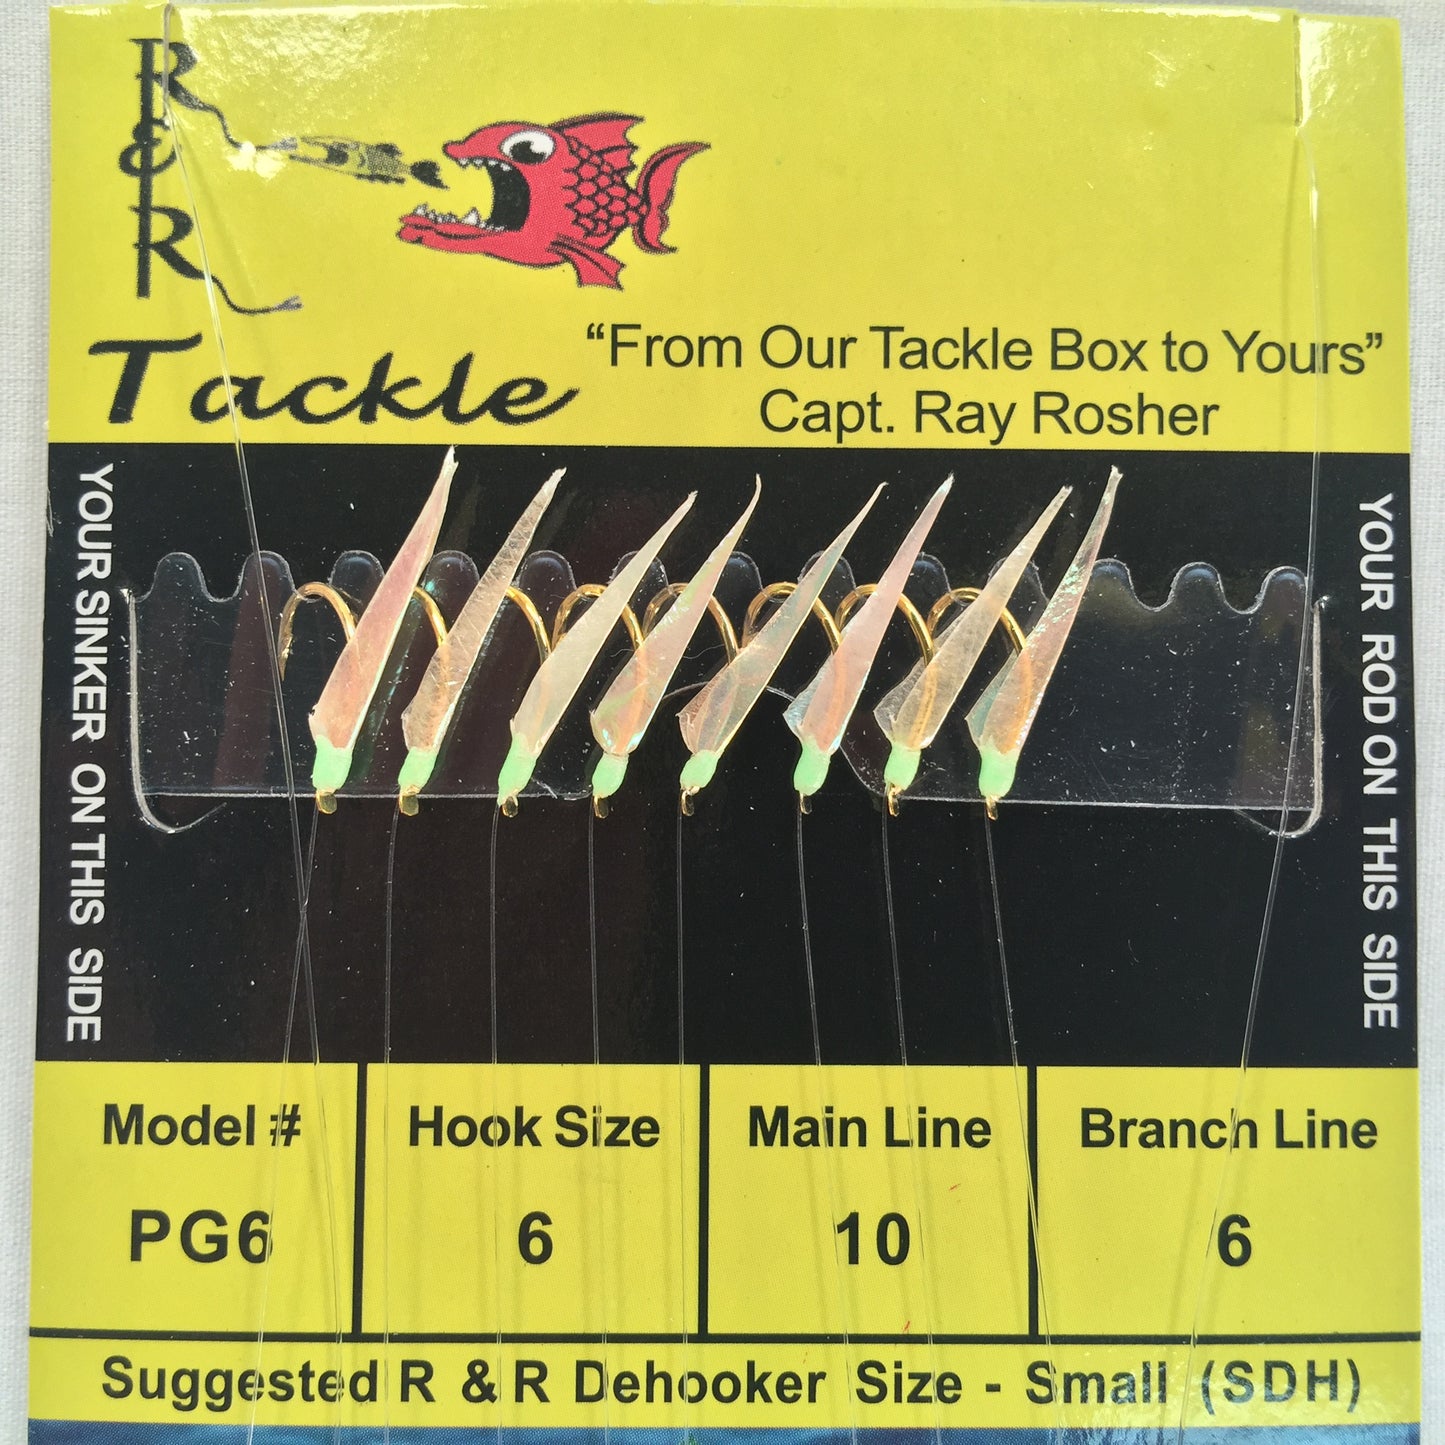 PG Mono Bait Rigs - with fish skin & green heads